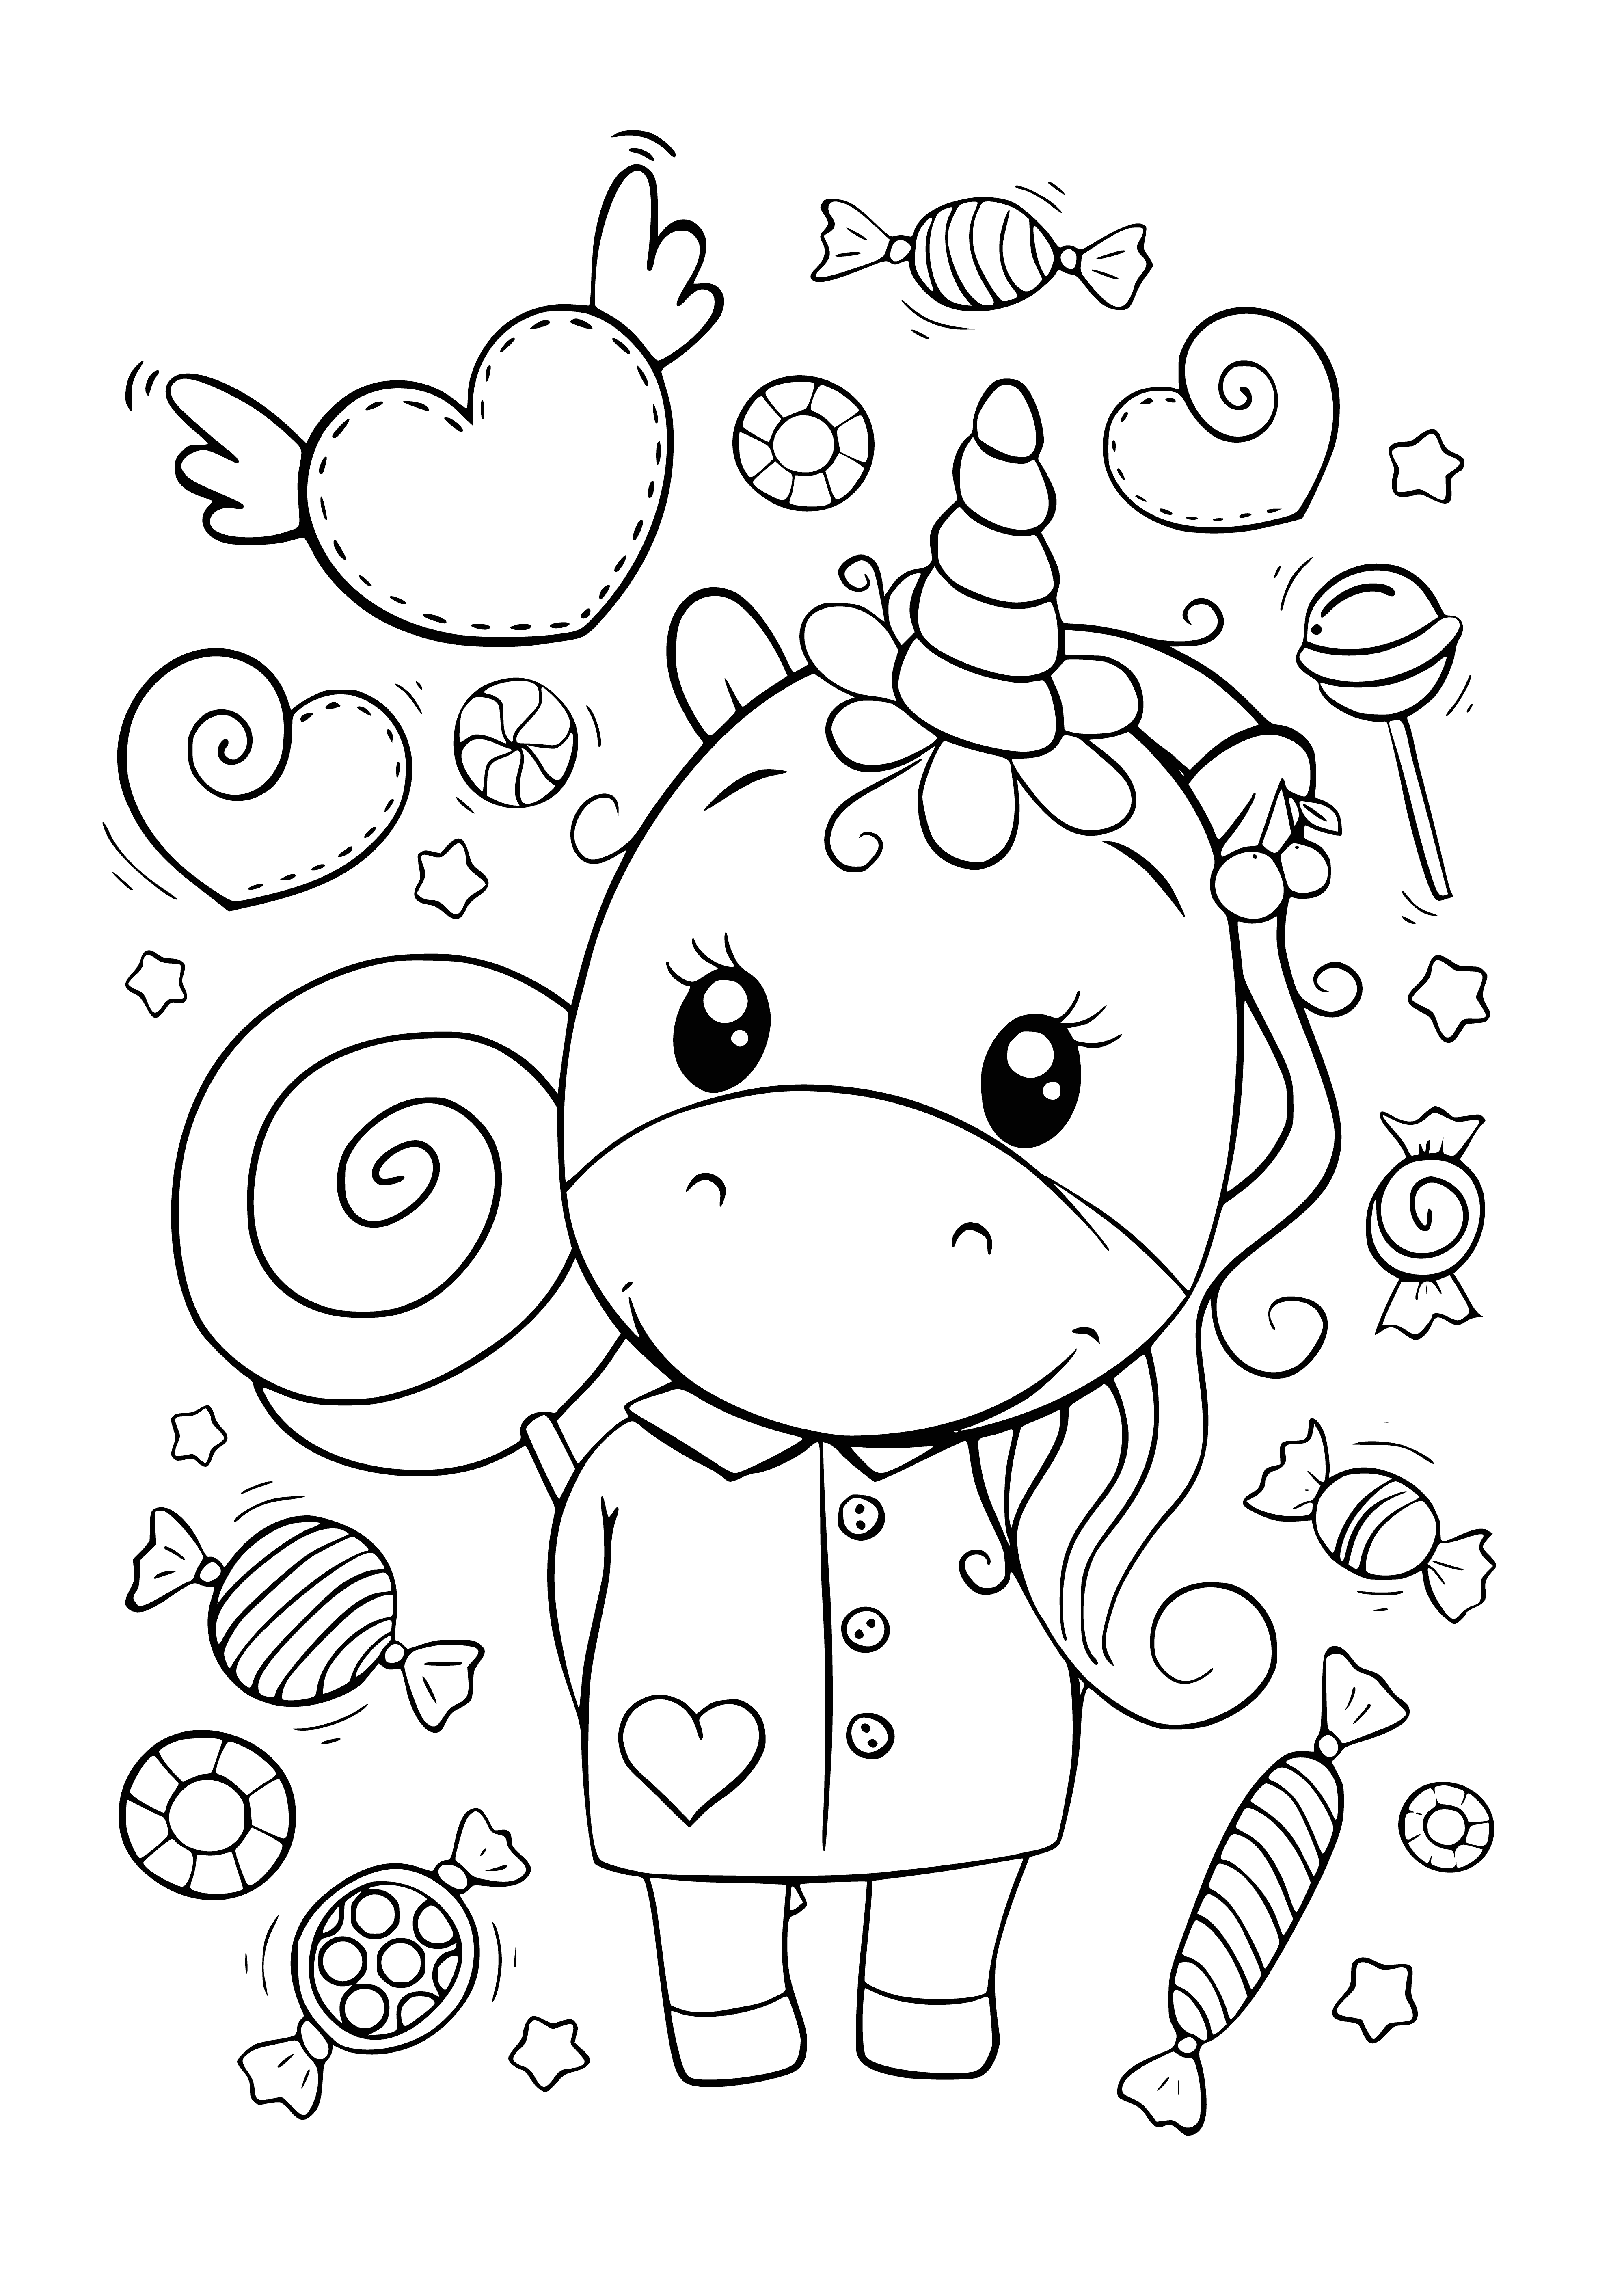 coloring page: A cute little unicorn with a magic horn flies in the sky with its pink and purple mane and tail.